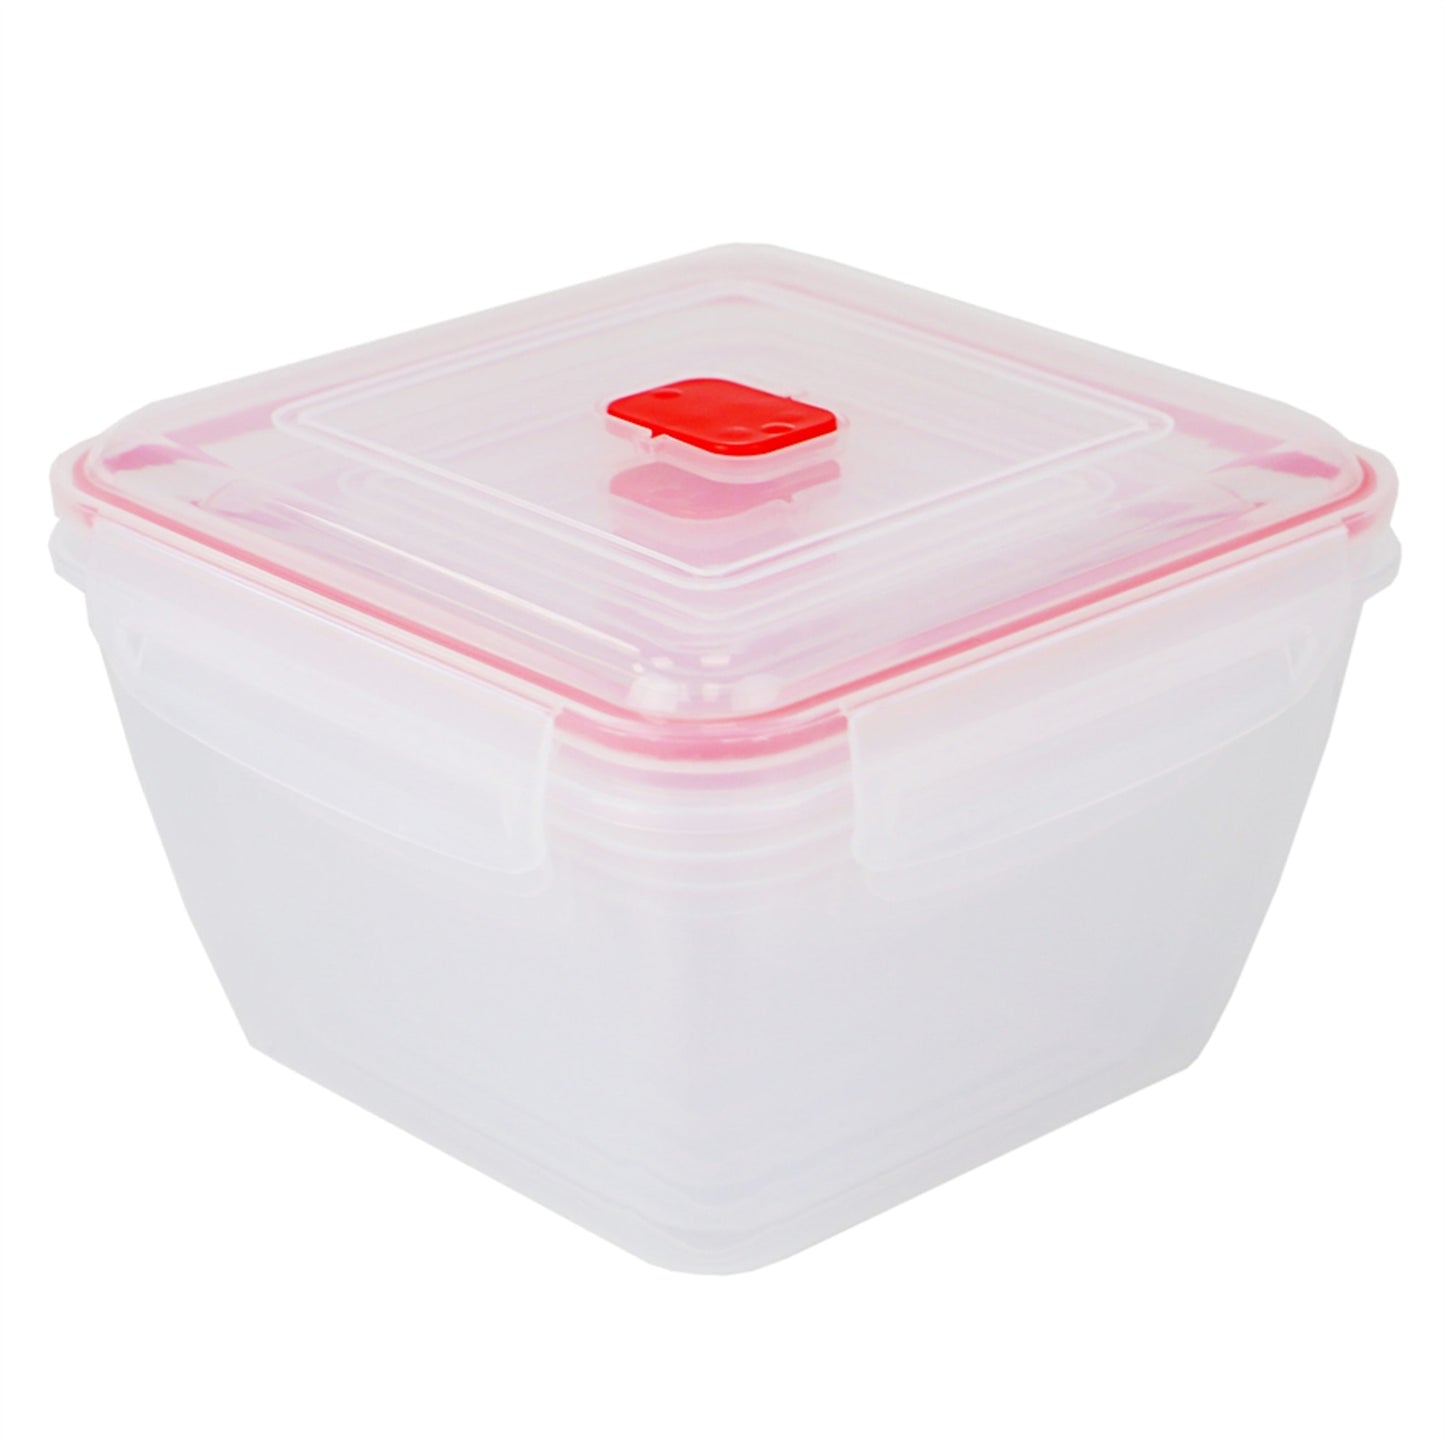 10 Piece Locking Square Plastic Food Storage Containers with Ventilated Snap-On Lids, Red